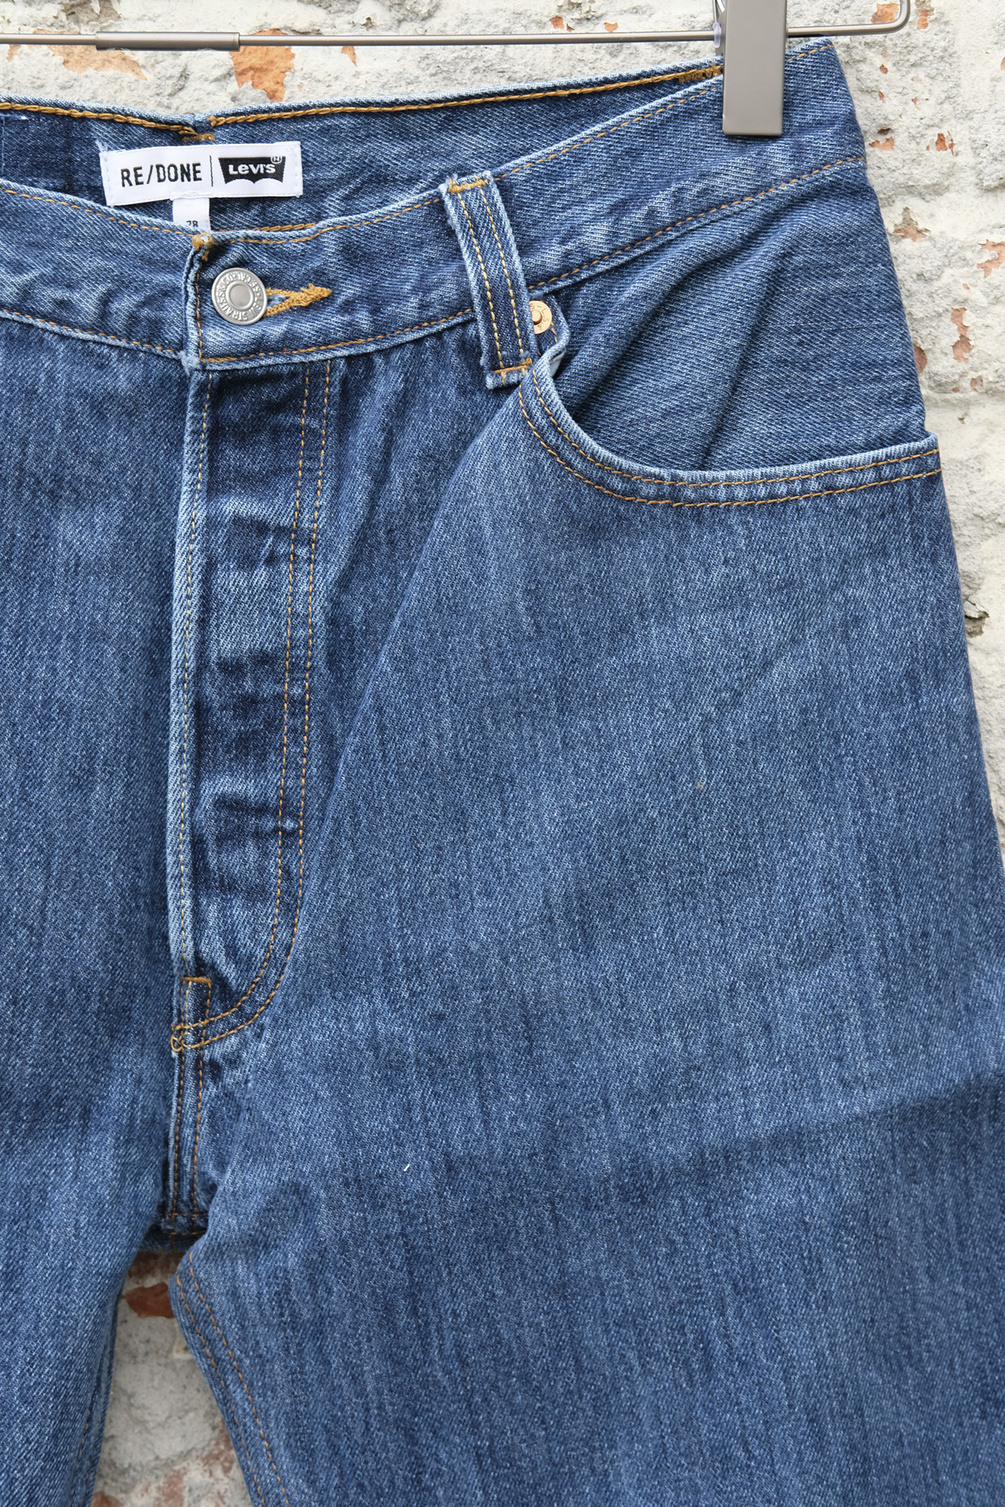 redone high rise stove pipe blue 28 › jeans | soul-sister